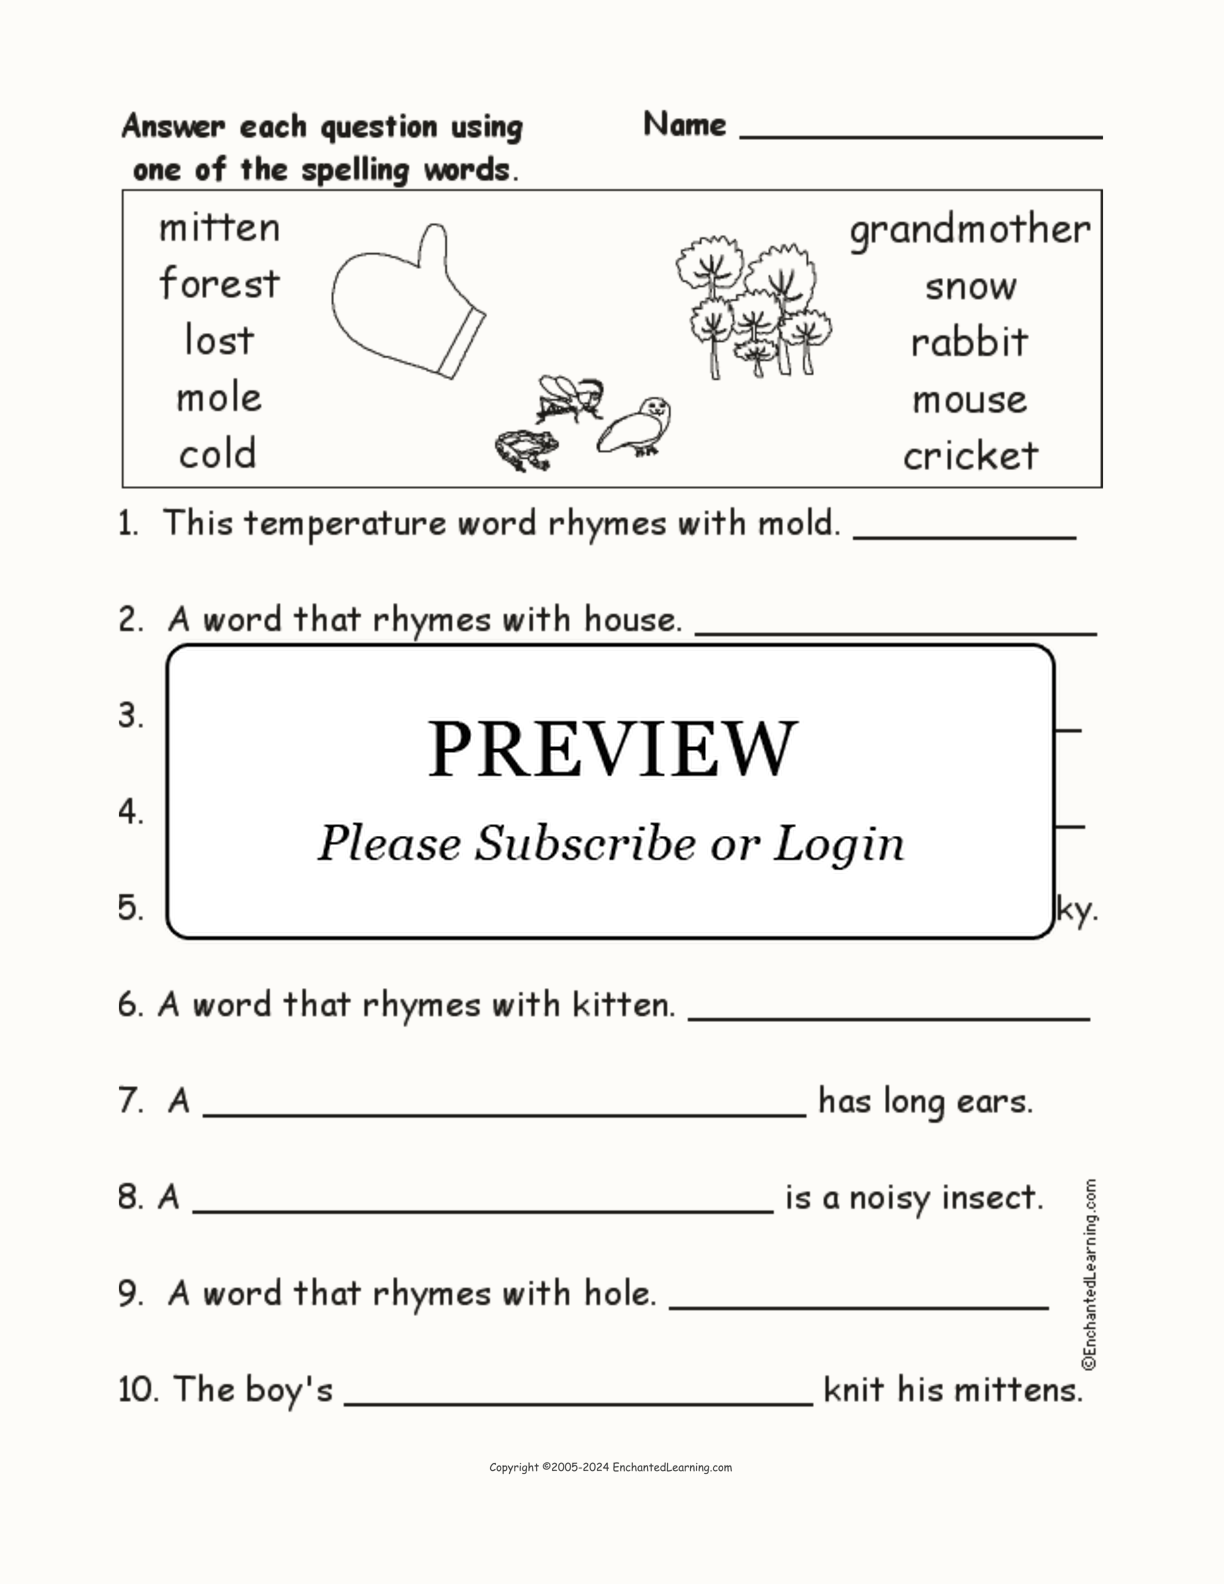 'The Mitten' Spelling Word Questions interactive worksheet page 1